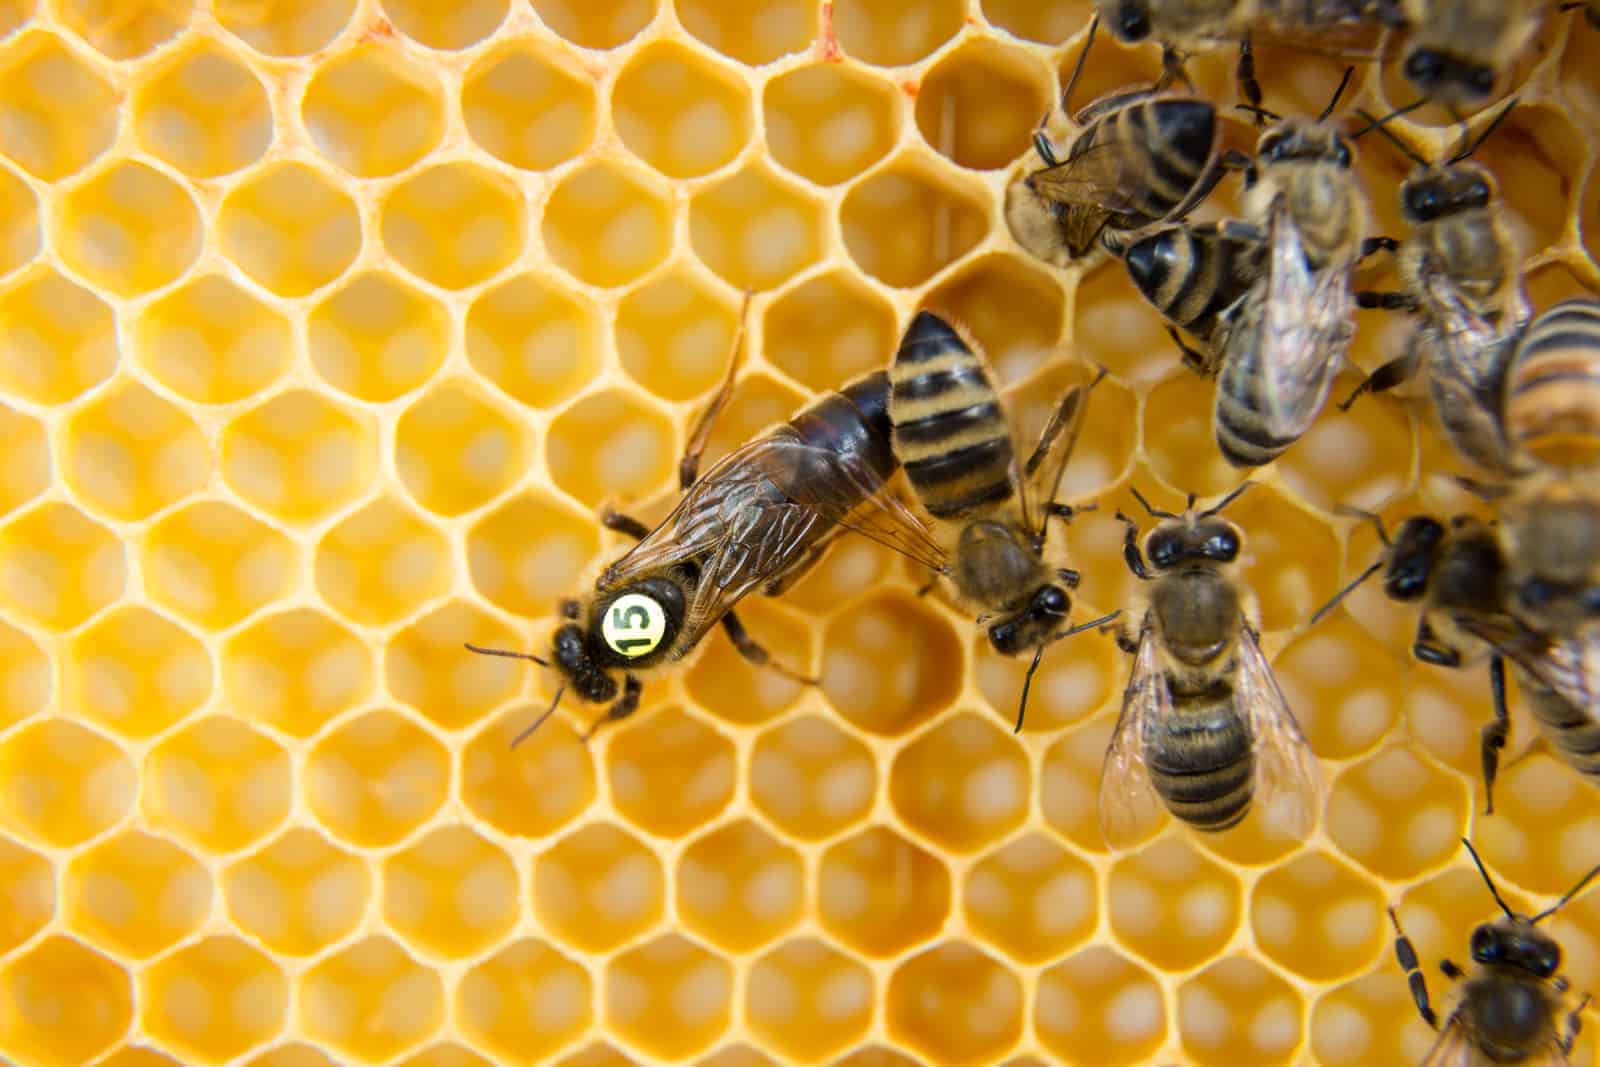 why is your queen bee not laying eggs?